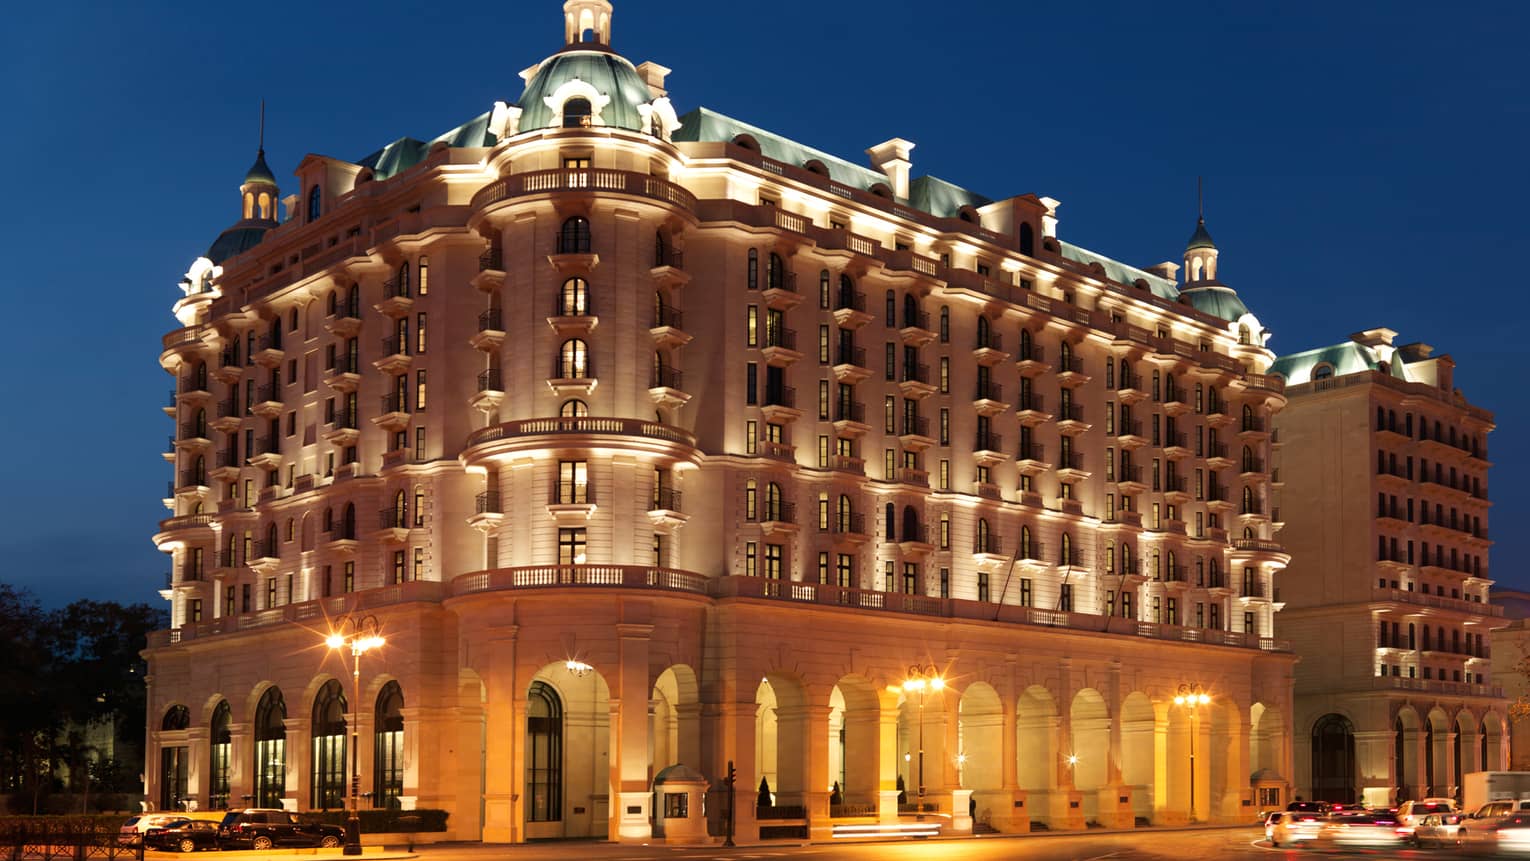 Night view of Baku Four Seasons Hotel Beaux-Arts-style building exterior with lights, illuminated roof